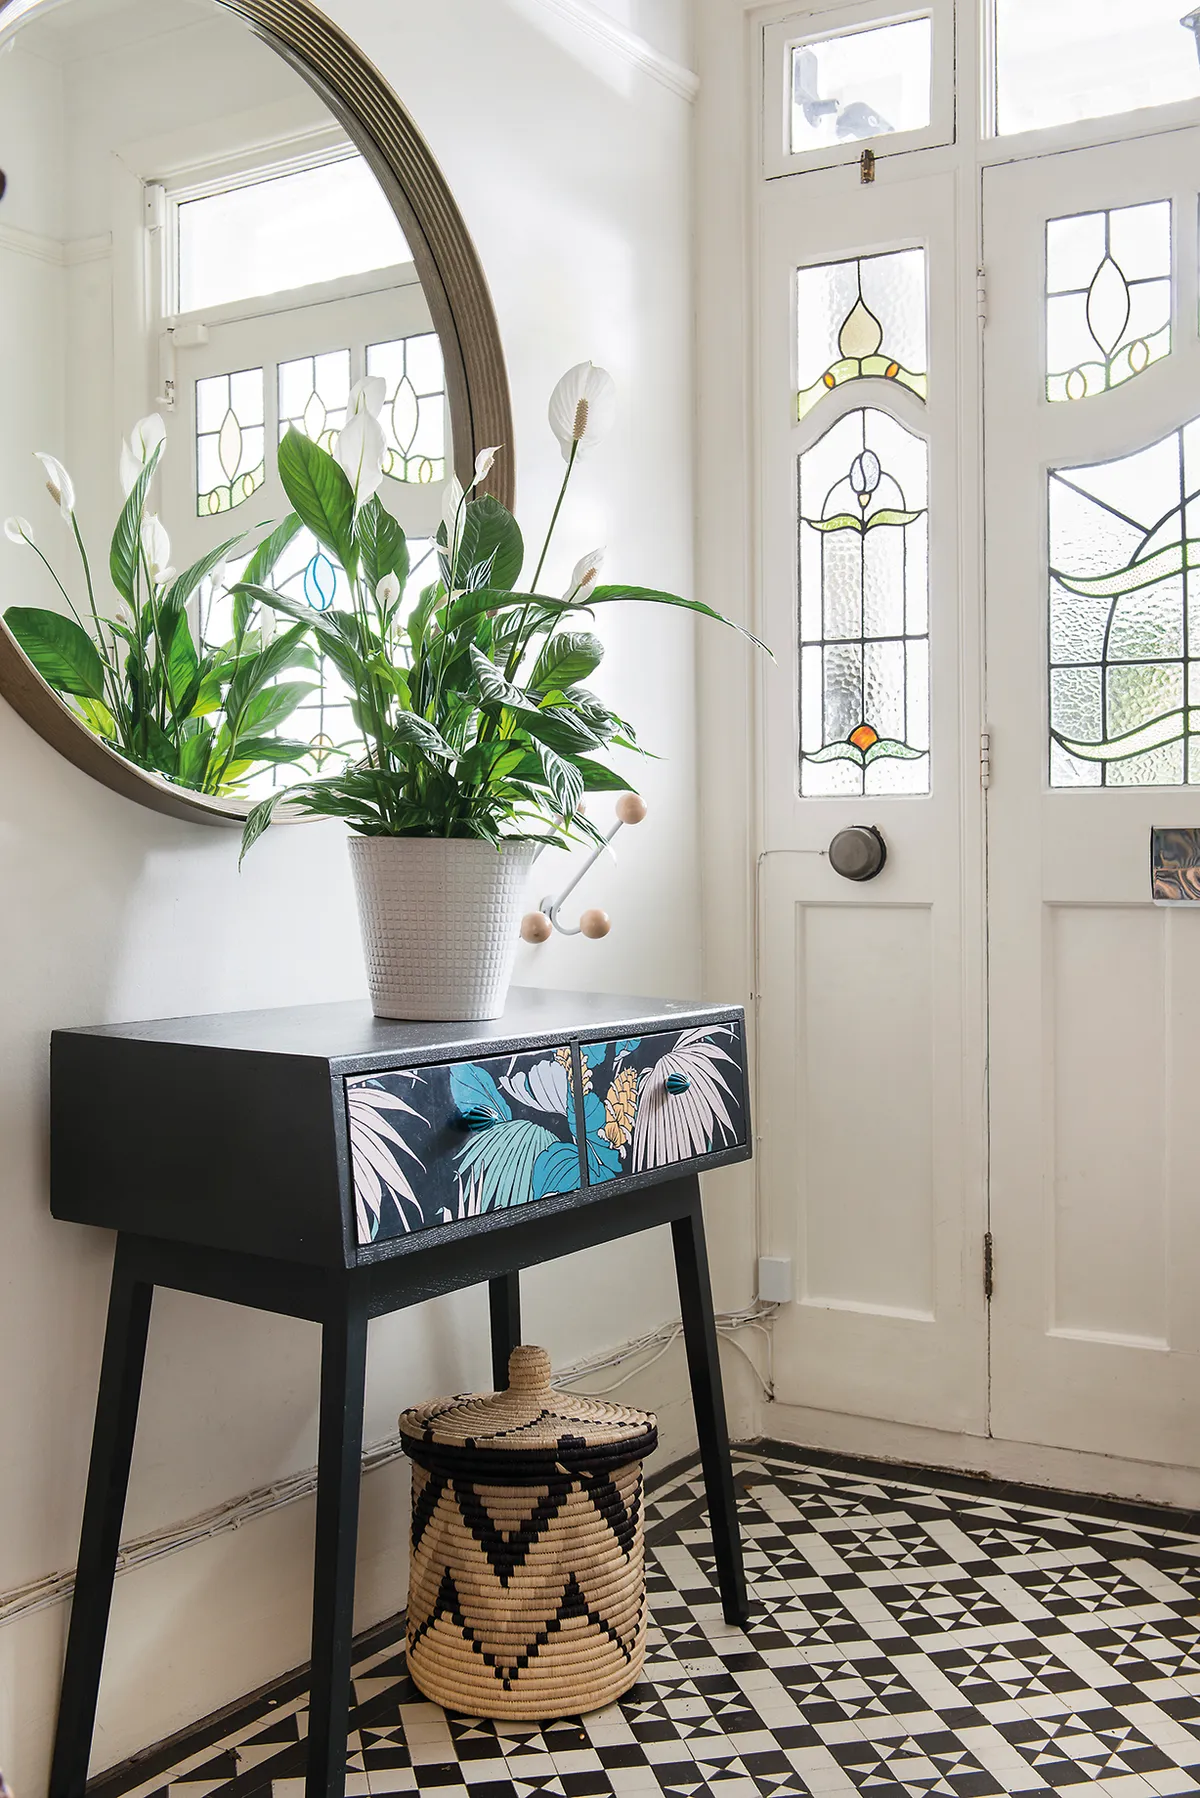 Original features, such as the hall’s practical, tiled floor and pretty stained glass windows were a big draw for Sophie and Rich. The console table, which Sophie picked up on eBay, has been transformed with paint, découpage and new handles